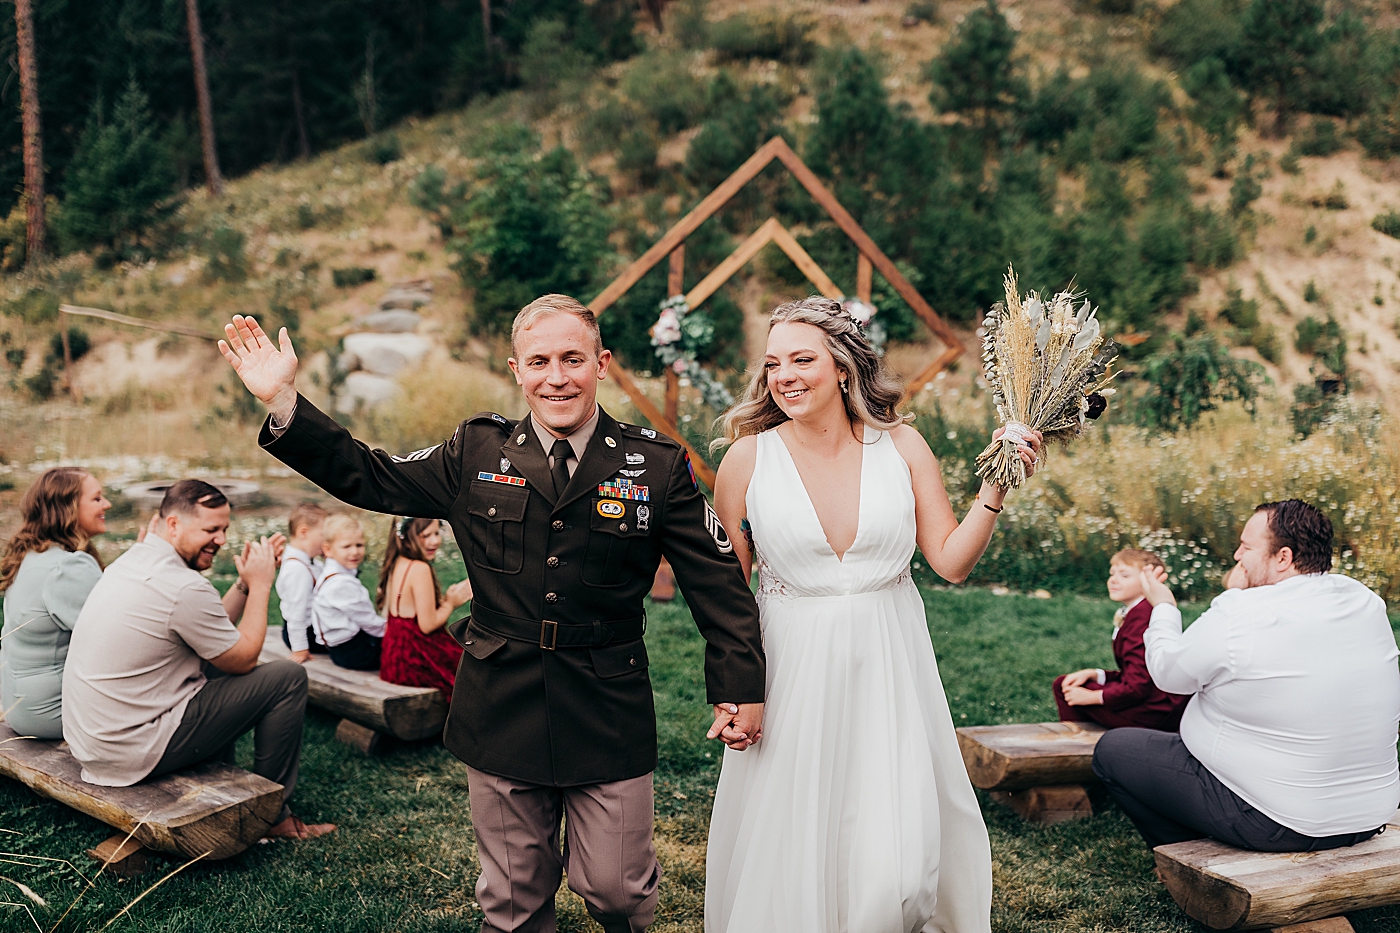 Bride and groom are married! Photo by Megan Montalvo Photography.